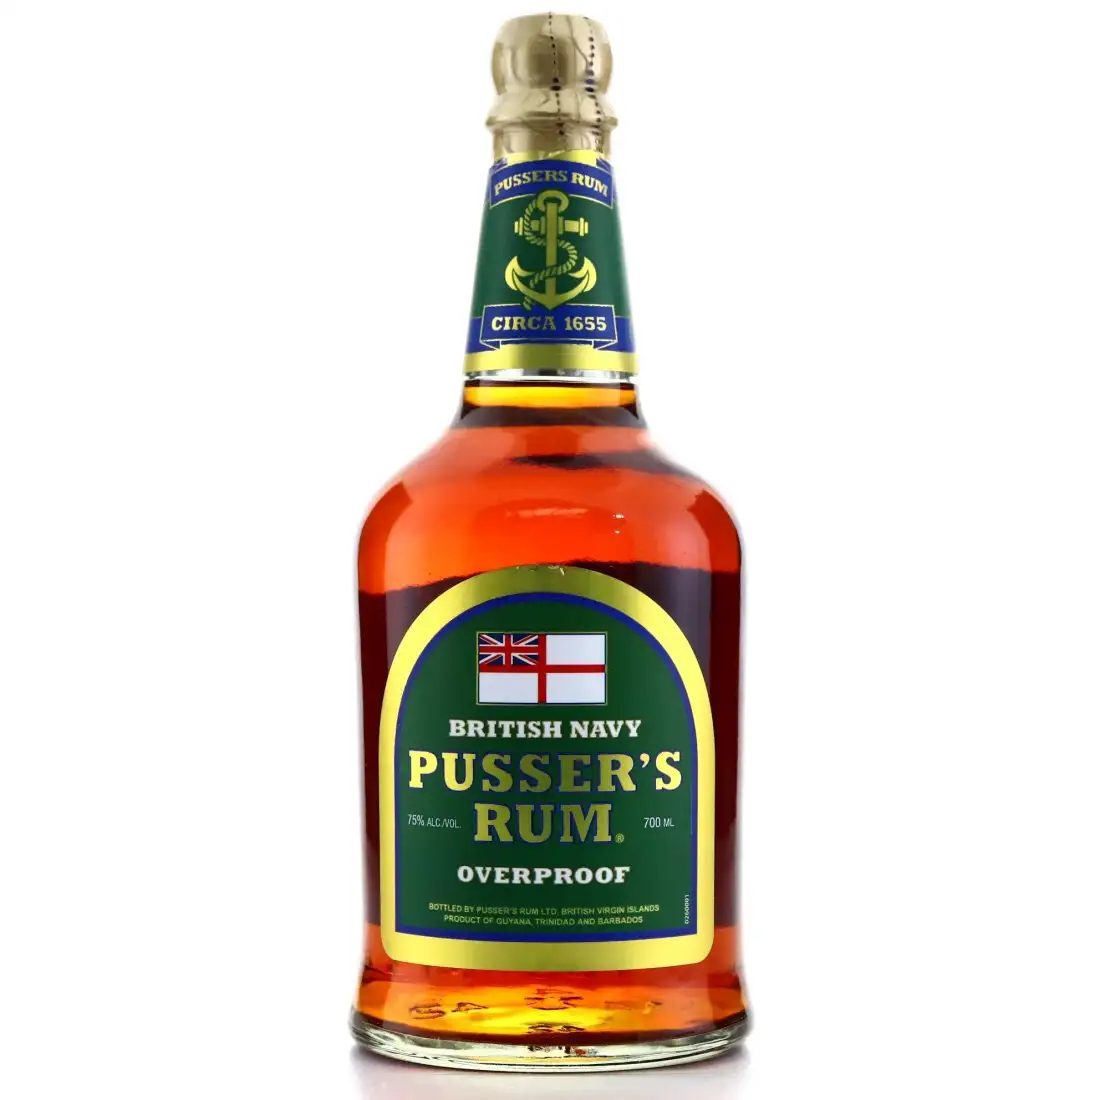 Image of the front of the bottle of the rum Green Label Overproof (Green Label)